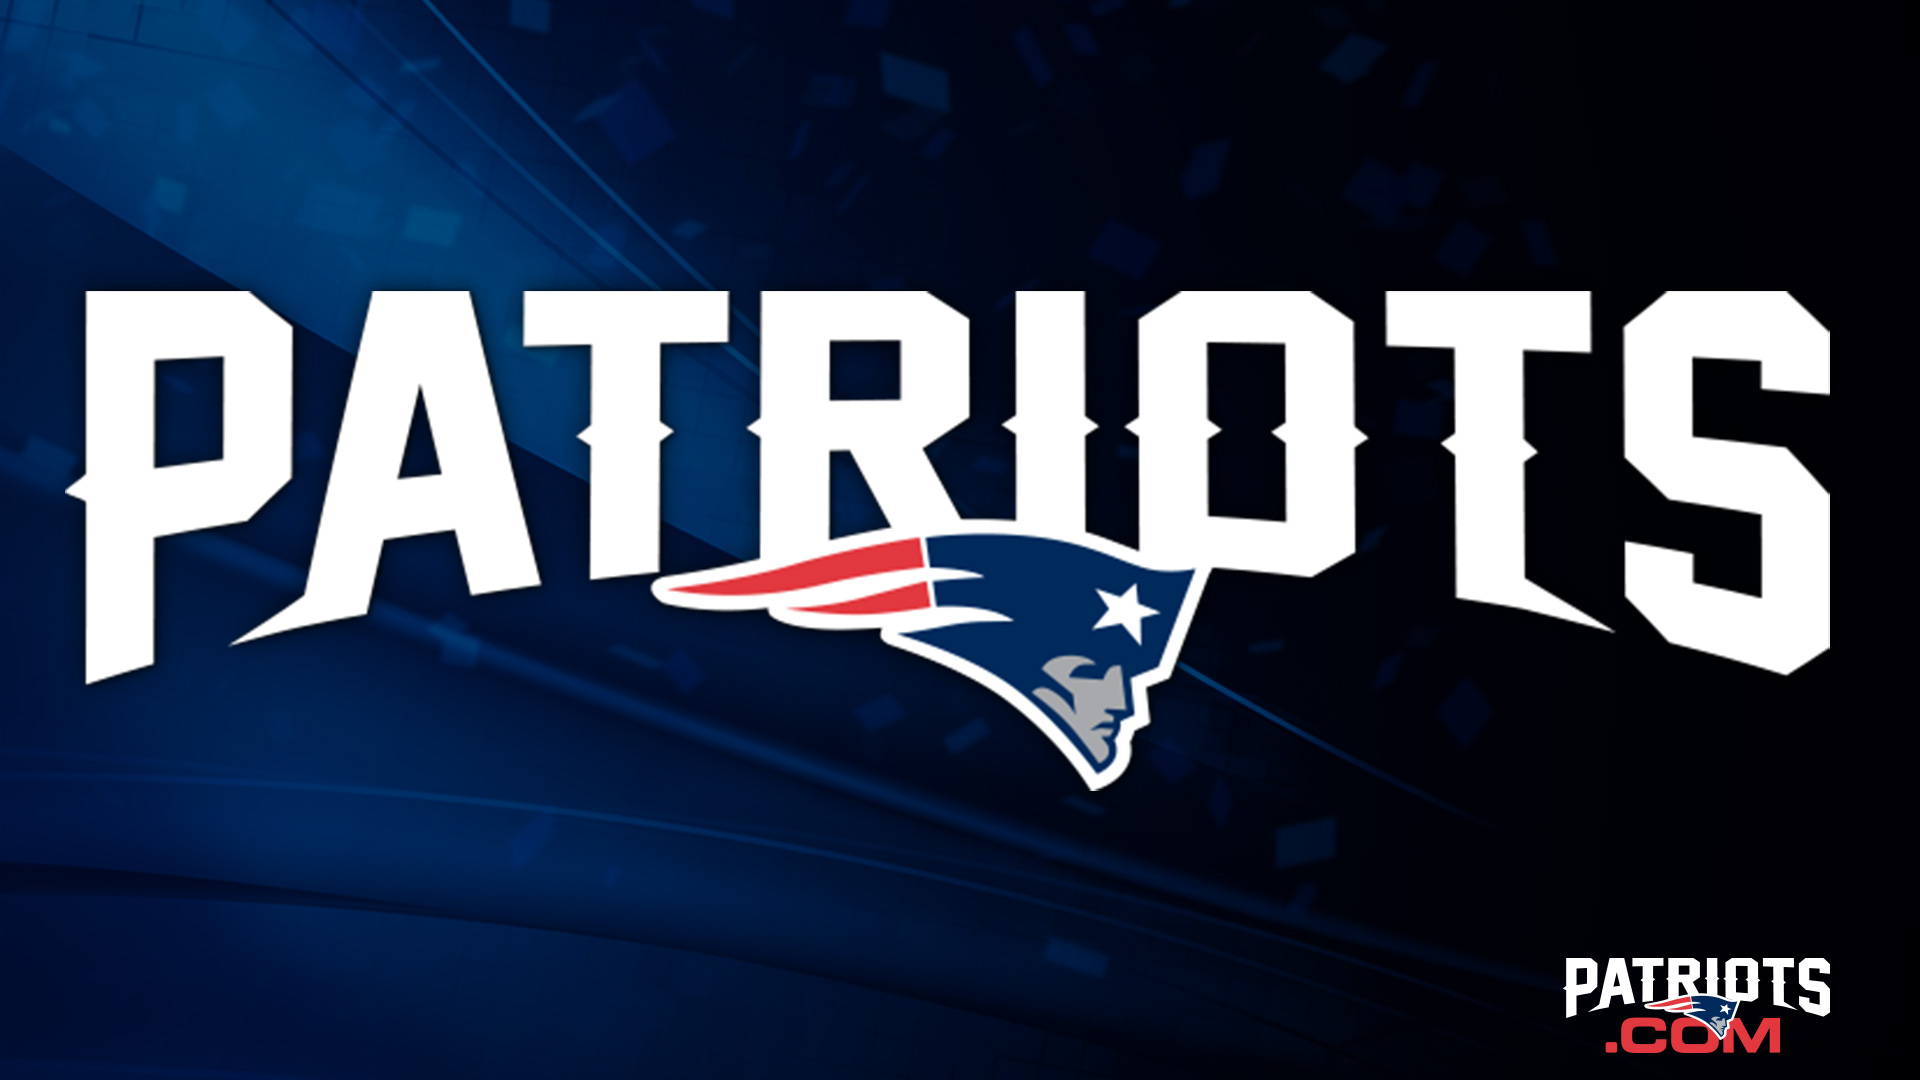 Images of New England Patriots | 1920x1080